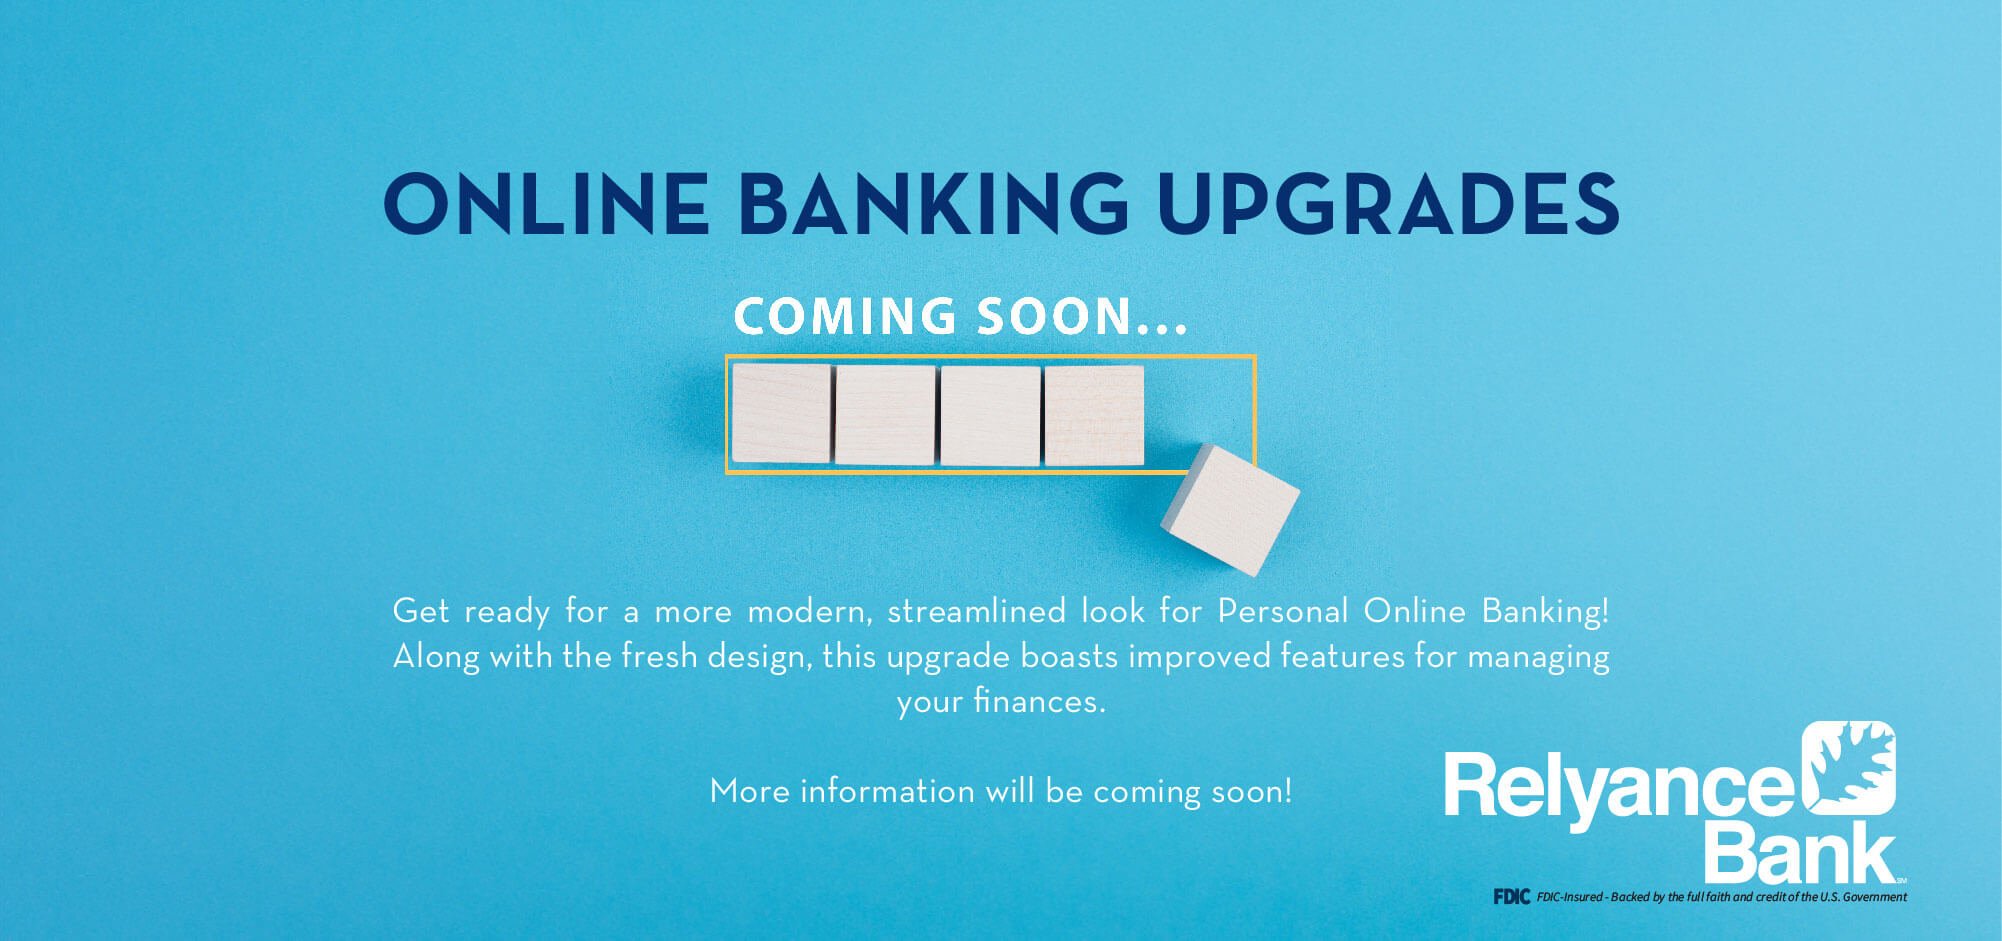 Online Banking Upgrades Coming Soon